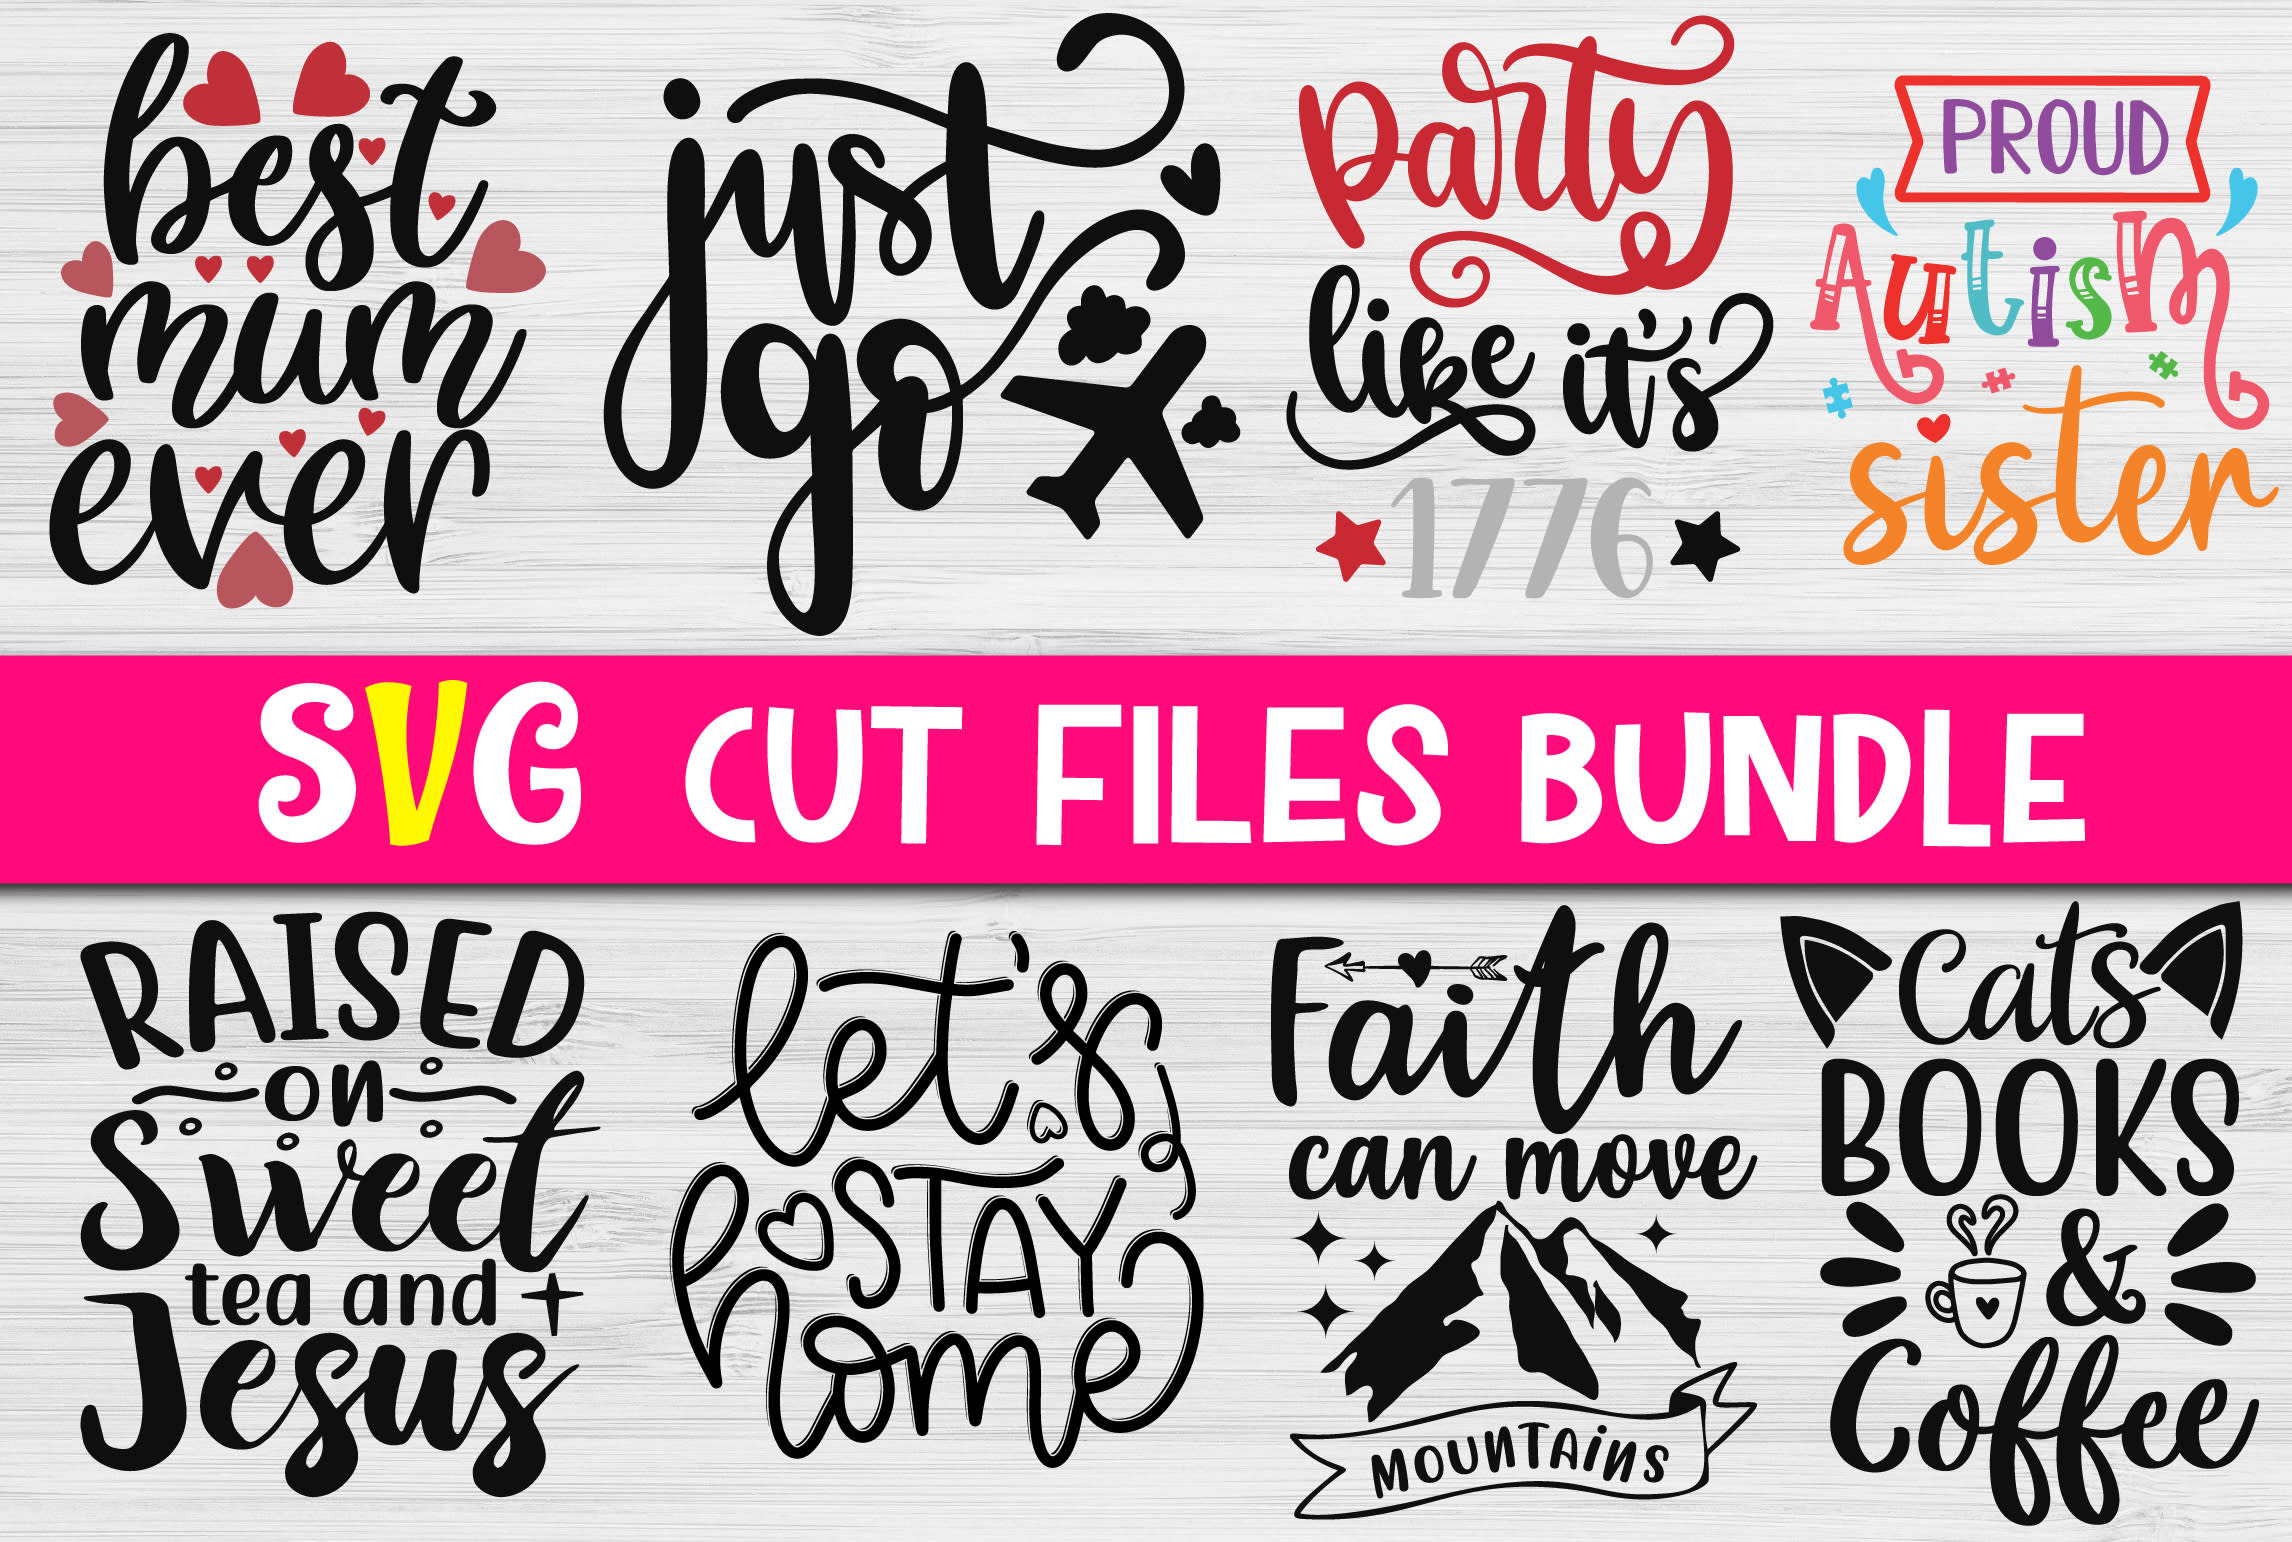 Download Provide Svg Cut Files Design Bundle For Etsy And Others By Hbiplob730 Fiverr